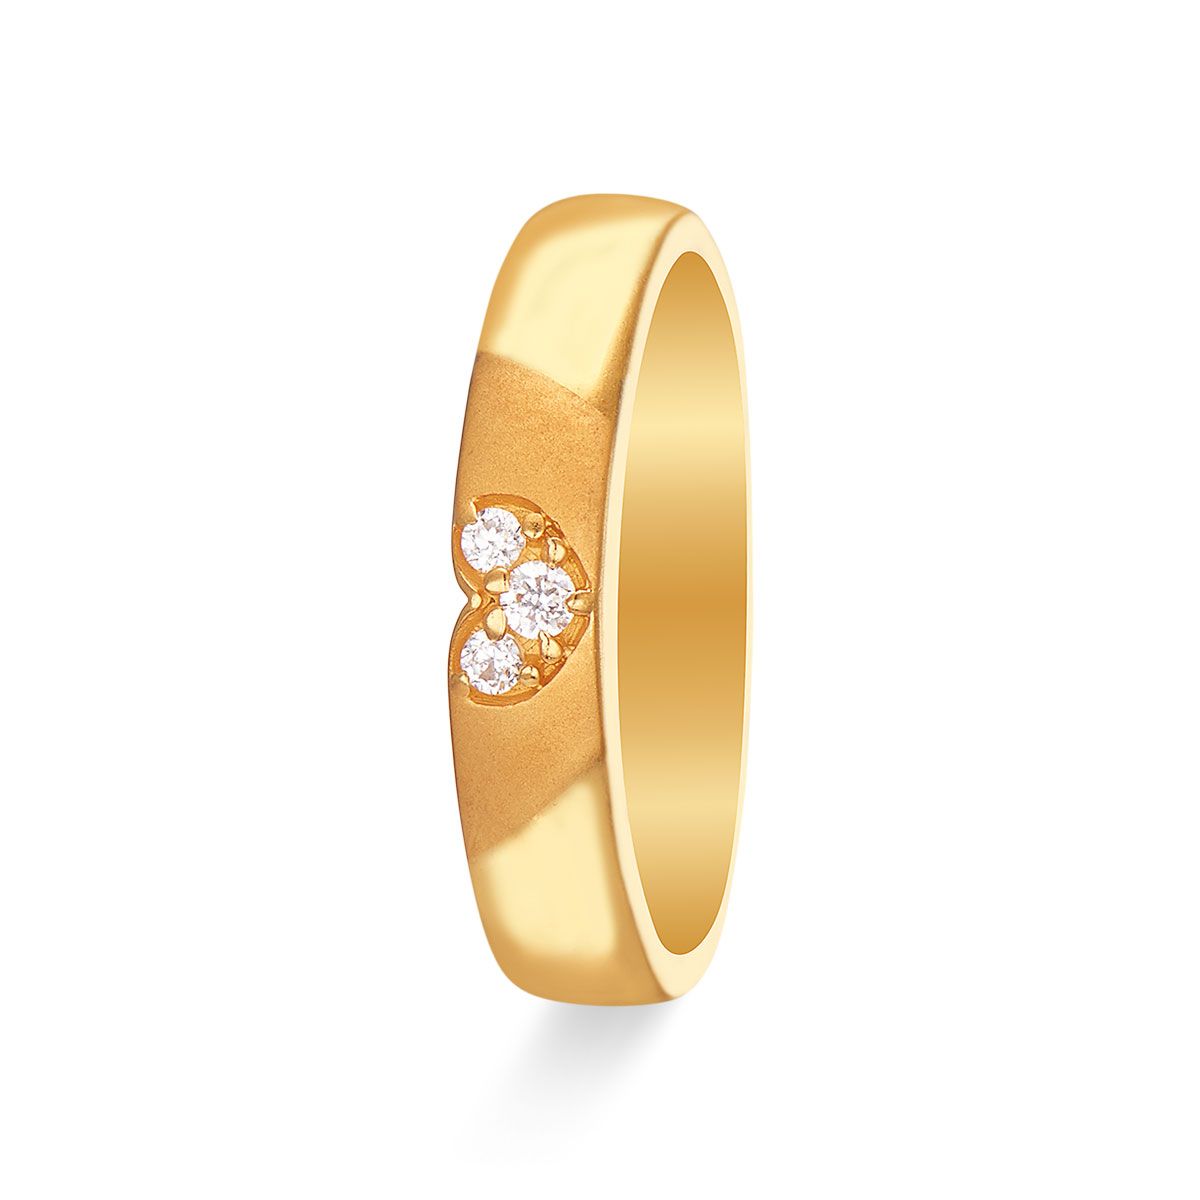 Gold ring designs for Male | Simple and heavy ring designs